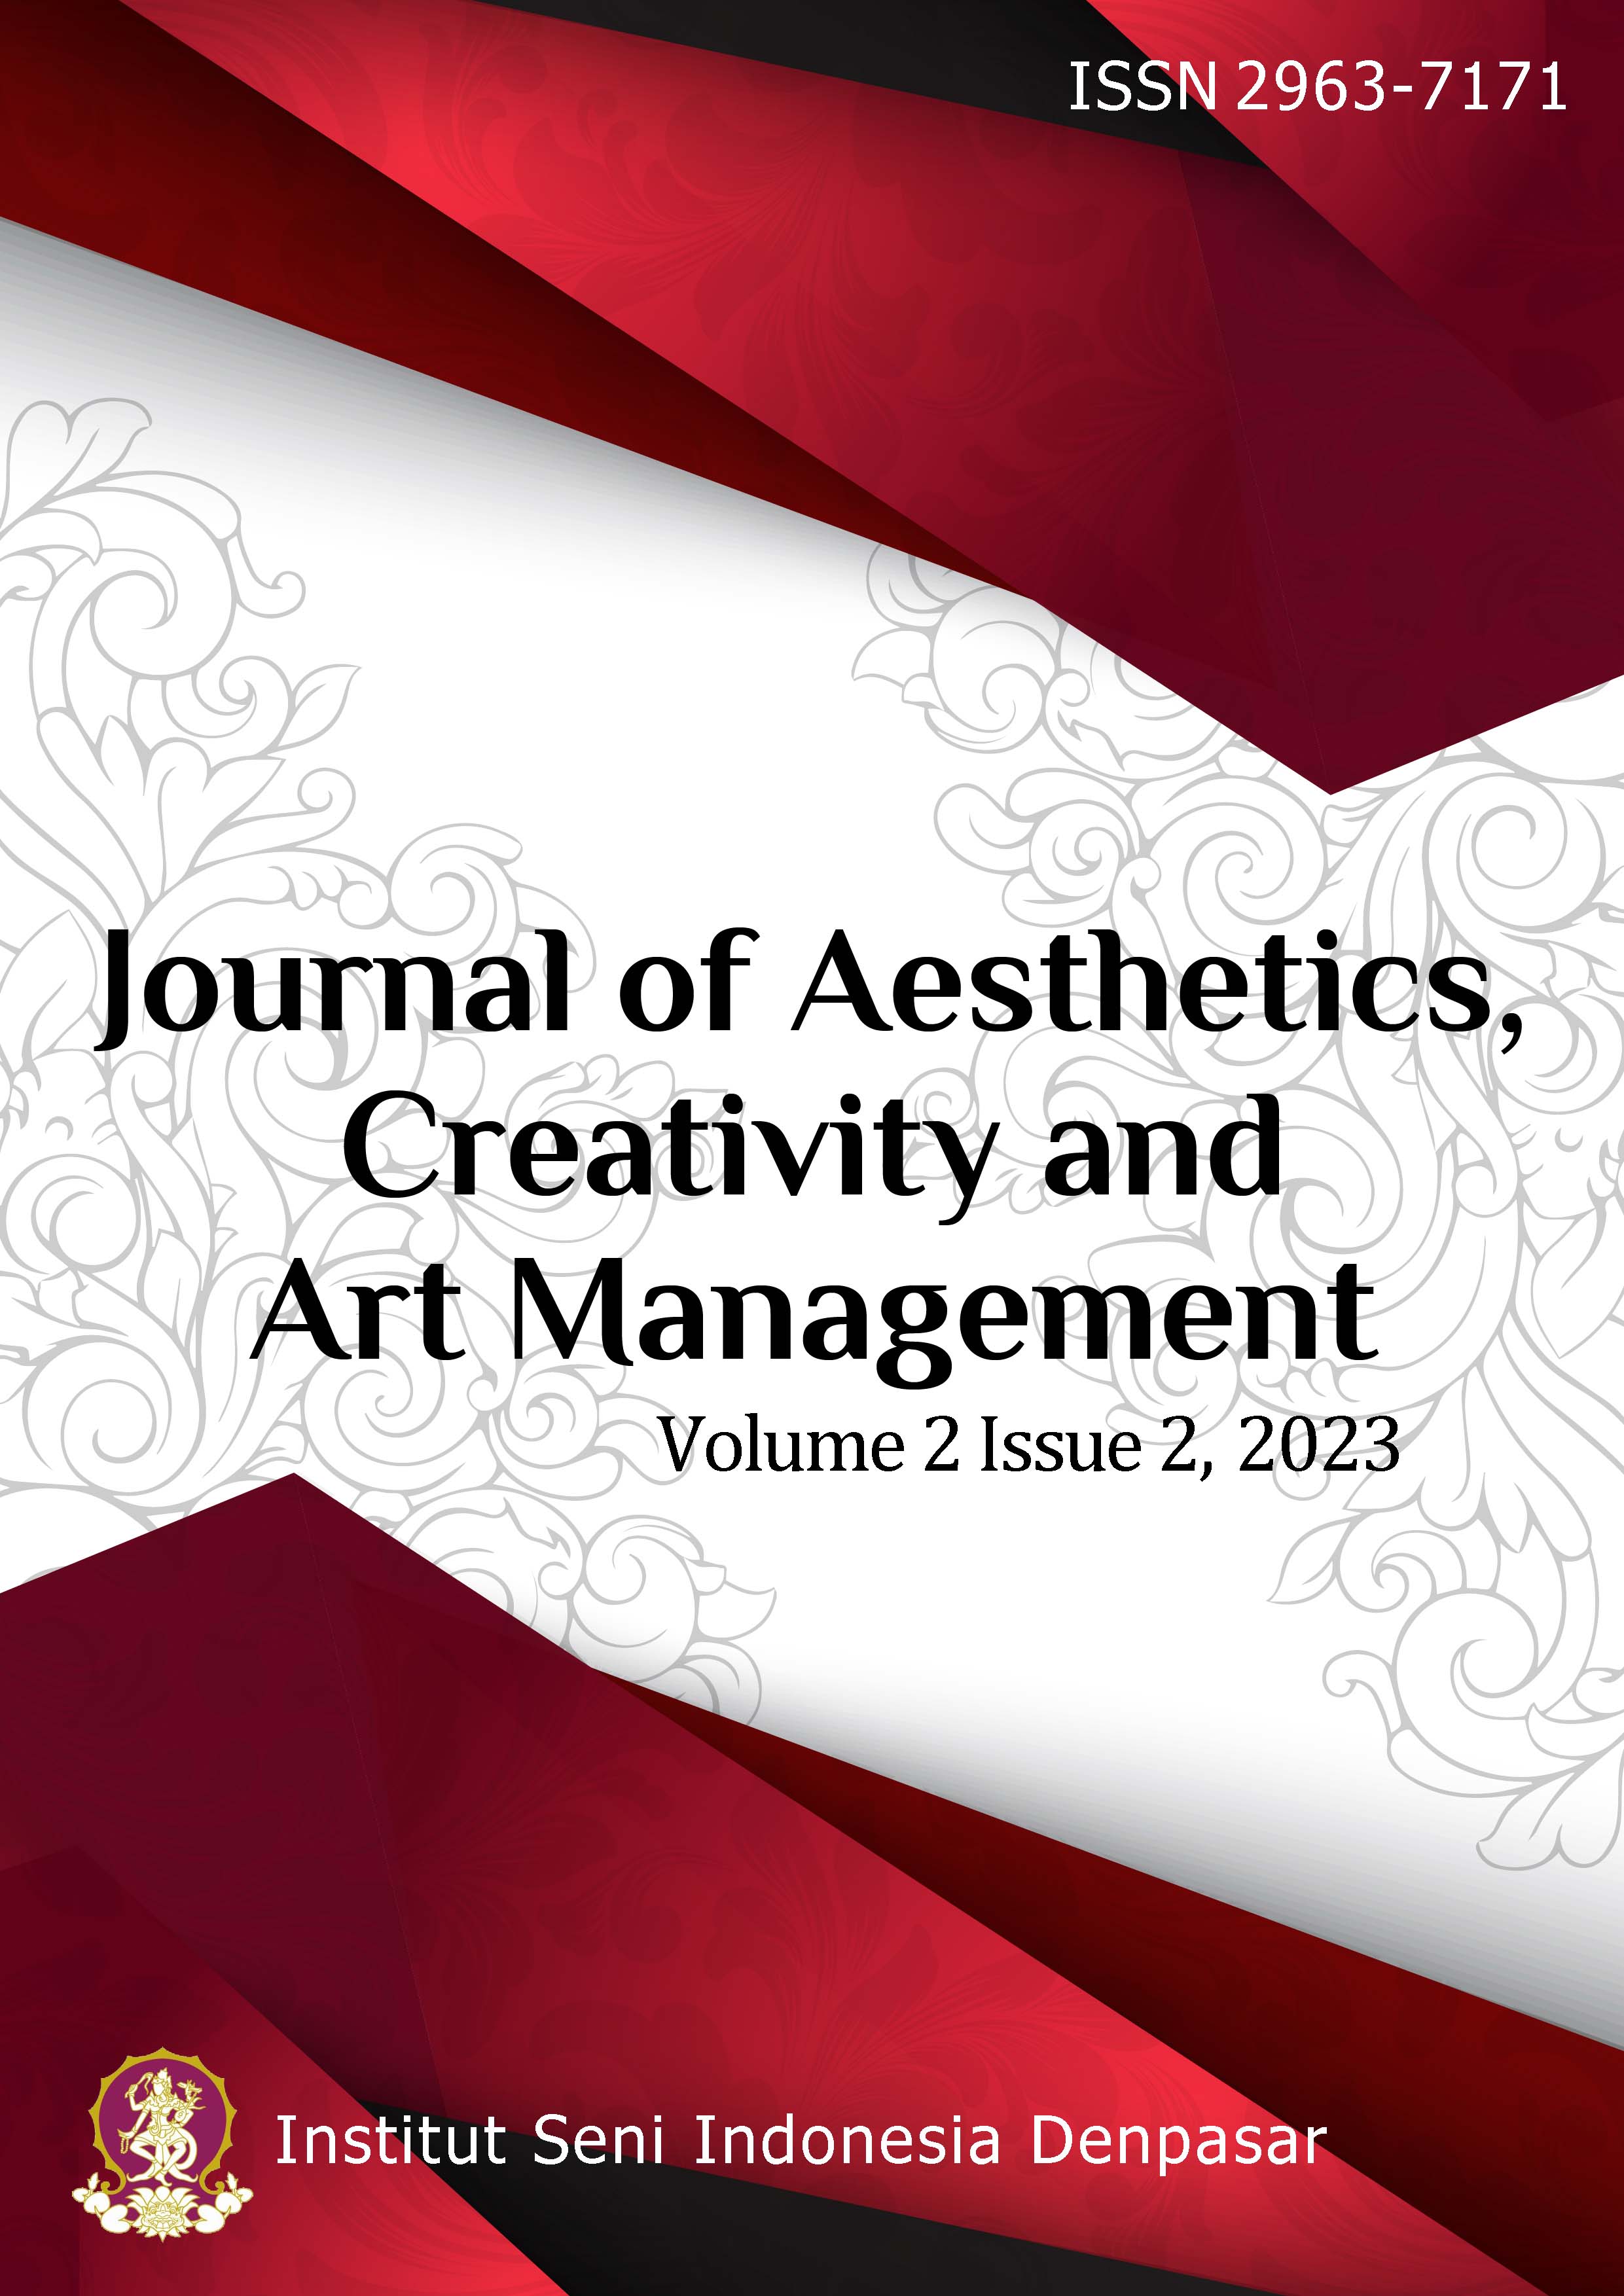 					View Vol. 2 No. 2 (2023): Journal of Aesthetics, Creativity and Art Management
				